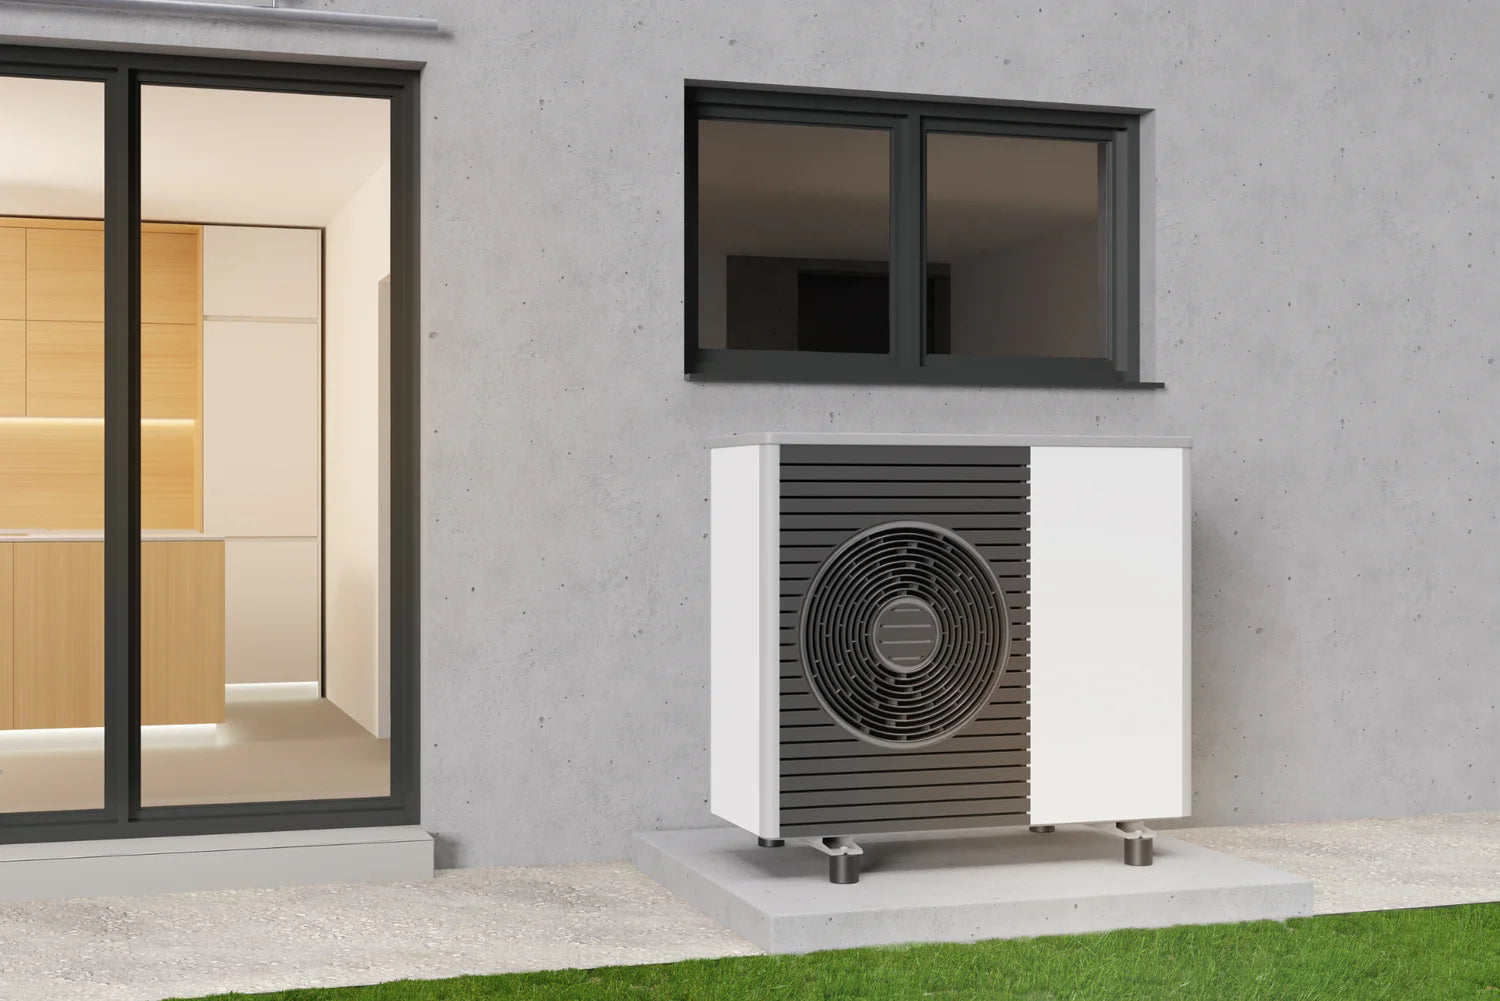 Infrared Heating or Heat Pump: Which is better for my new self-build property?